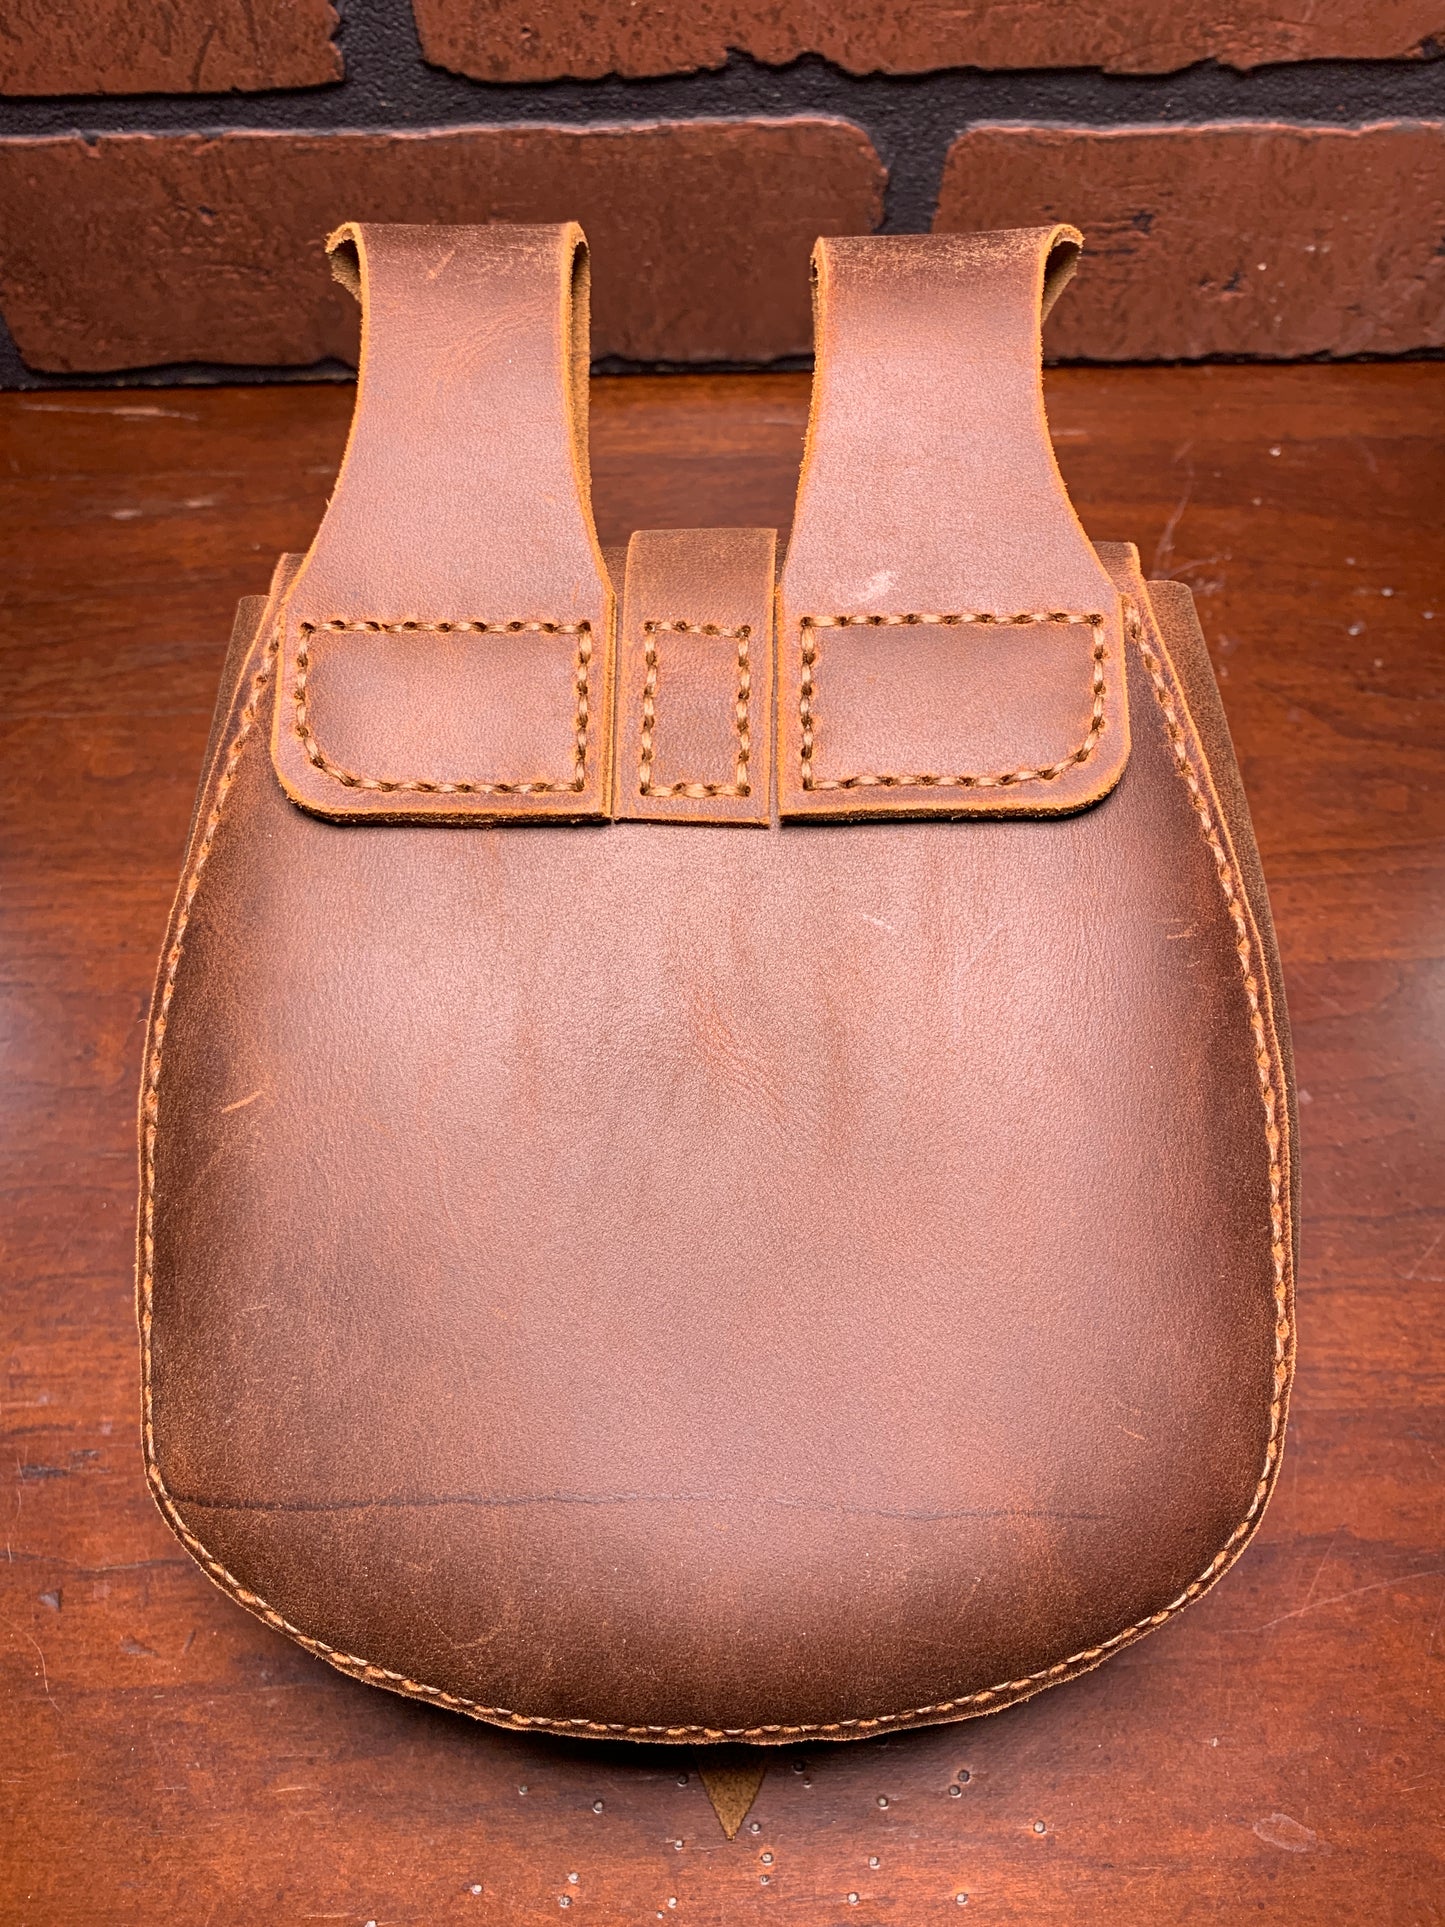 William Belt Bag in Rust Oil Tanned Leather